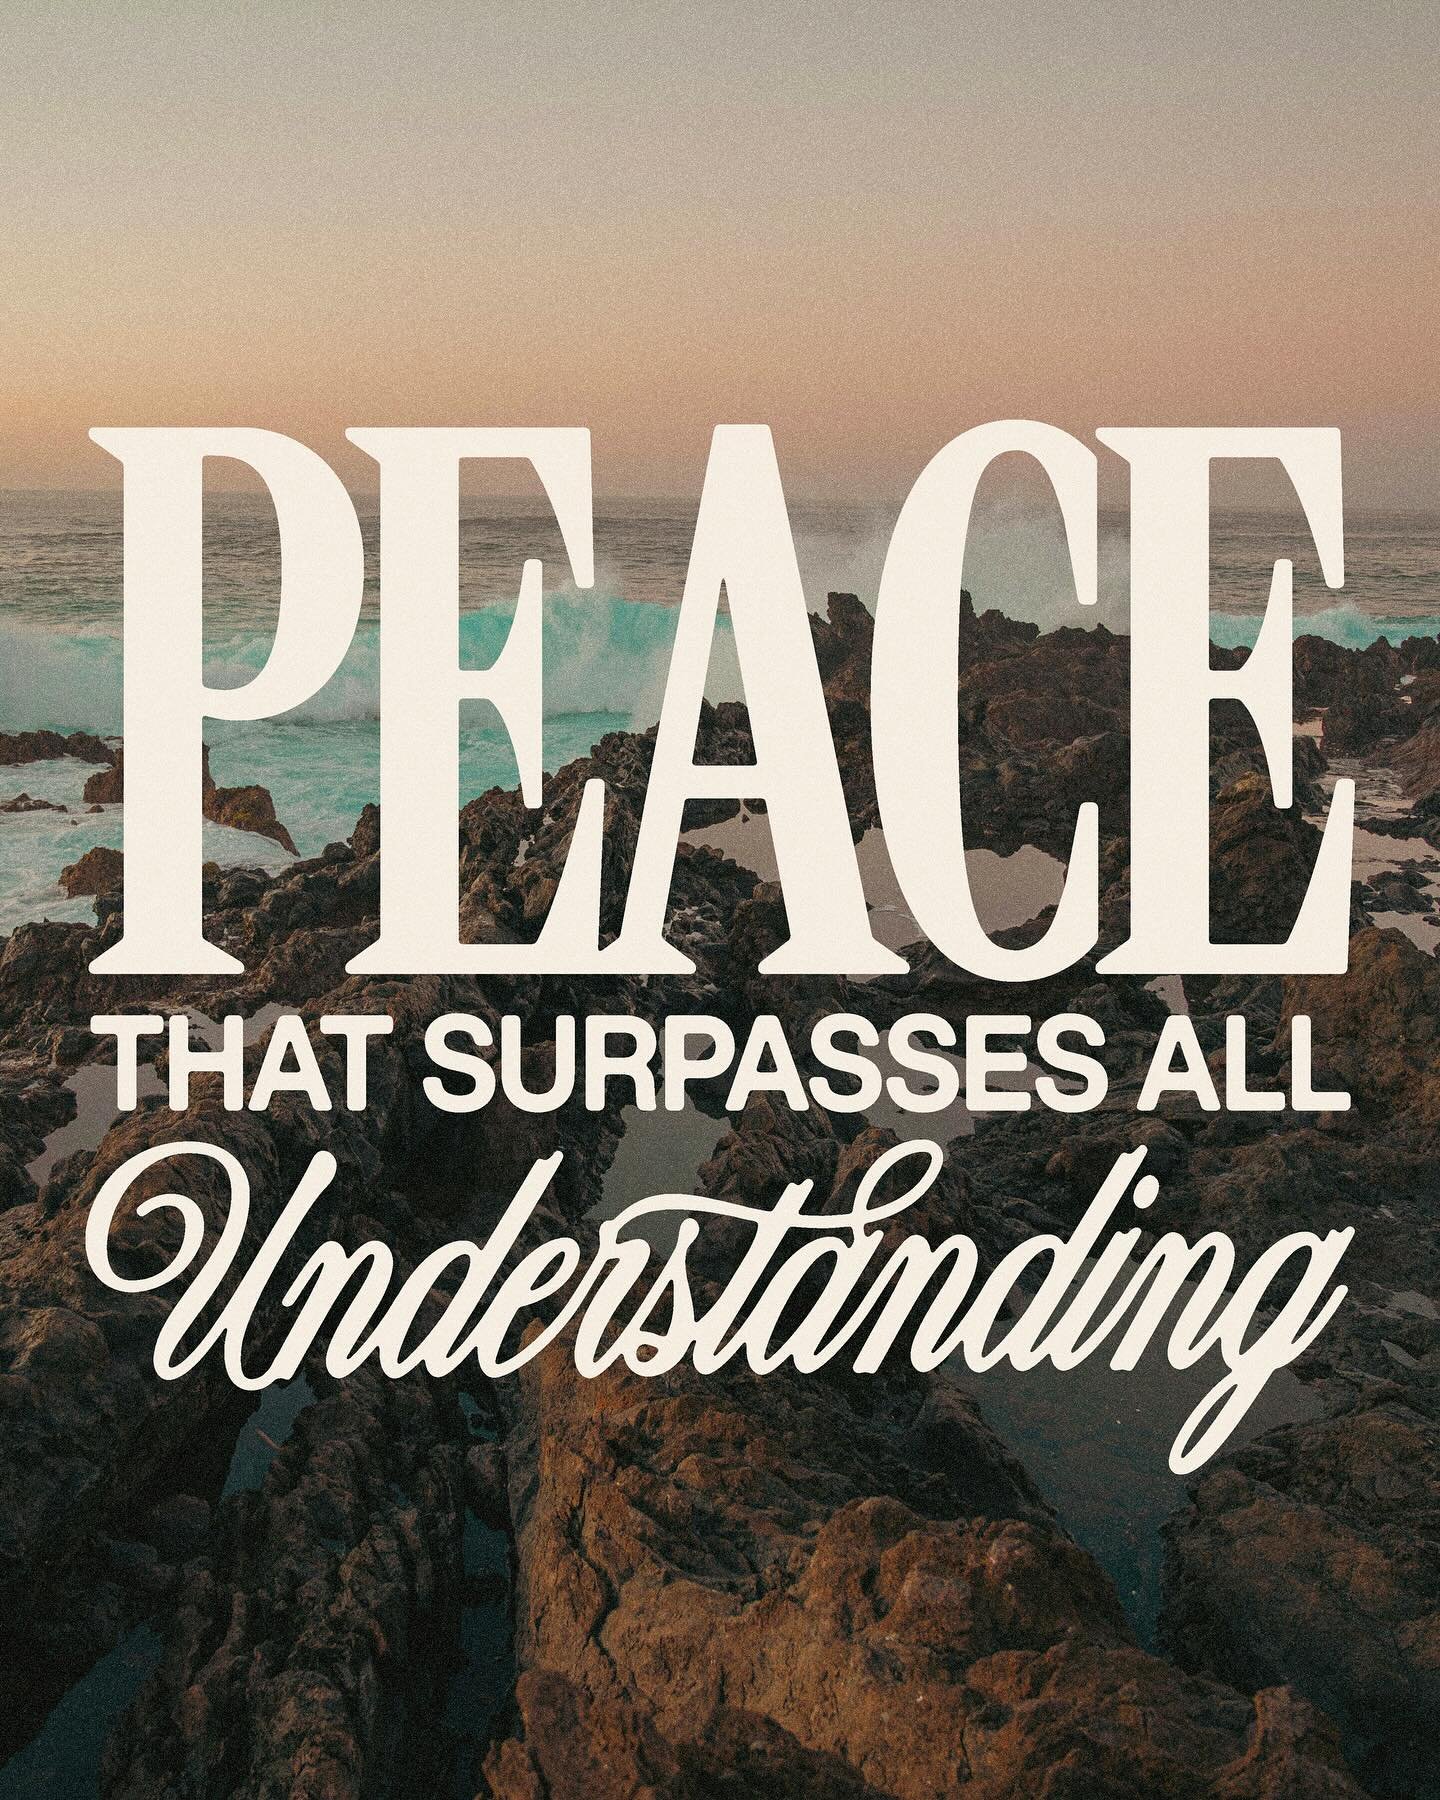 The peace that God can offer is you is FAR more than anything this world can offer. It&rsquo;s a peace that our minds cannot comprehend. It surpasses all understanding 🤯
&bull;
Swipe to see alternatives ➡️